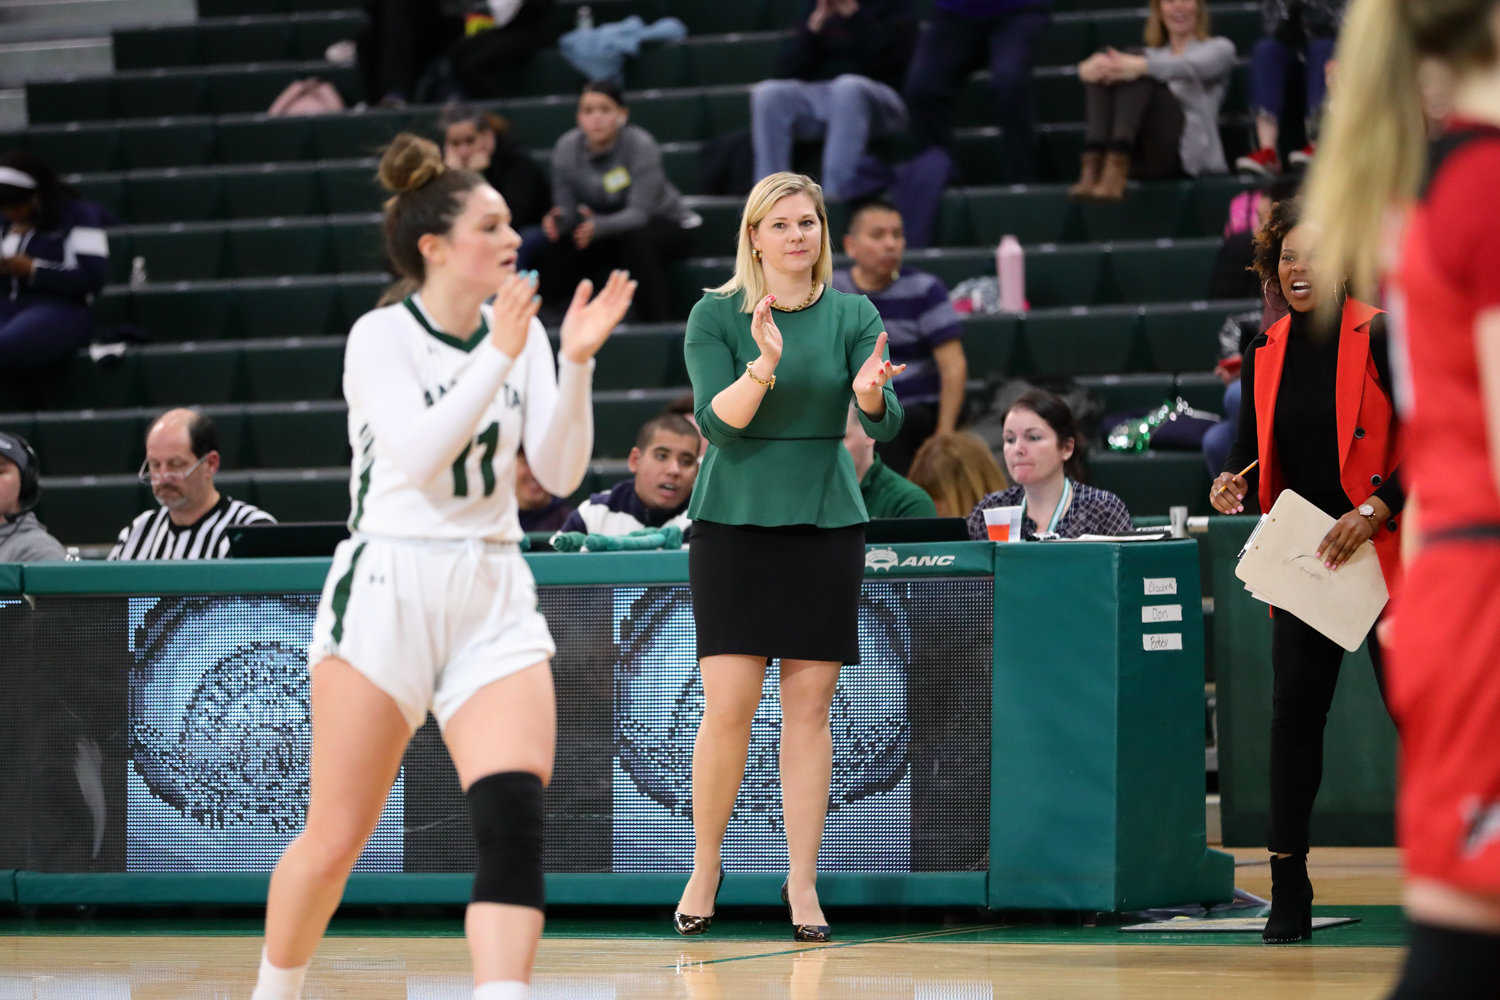 With a victory over Monmouth in Manhattan’s regular-season finale, the Jaspers notched their 15th win of the season, the highest single-season win total in head coach Heather Vulin’s four seasons at the helm.